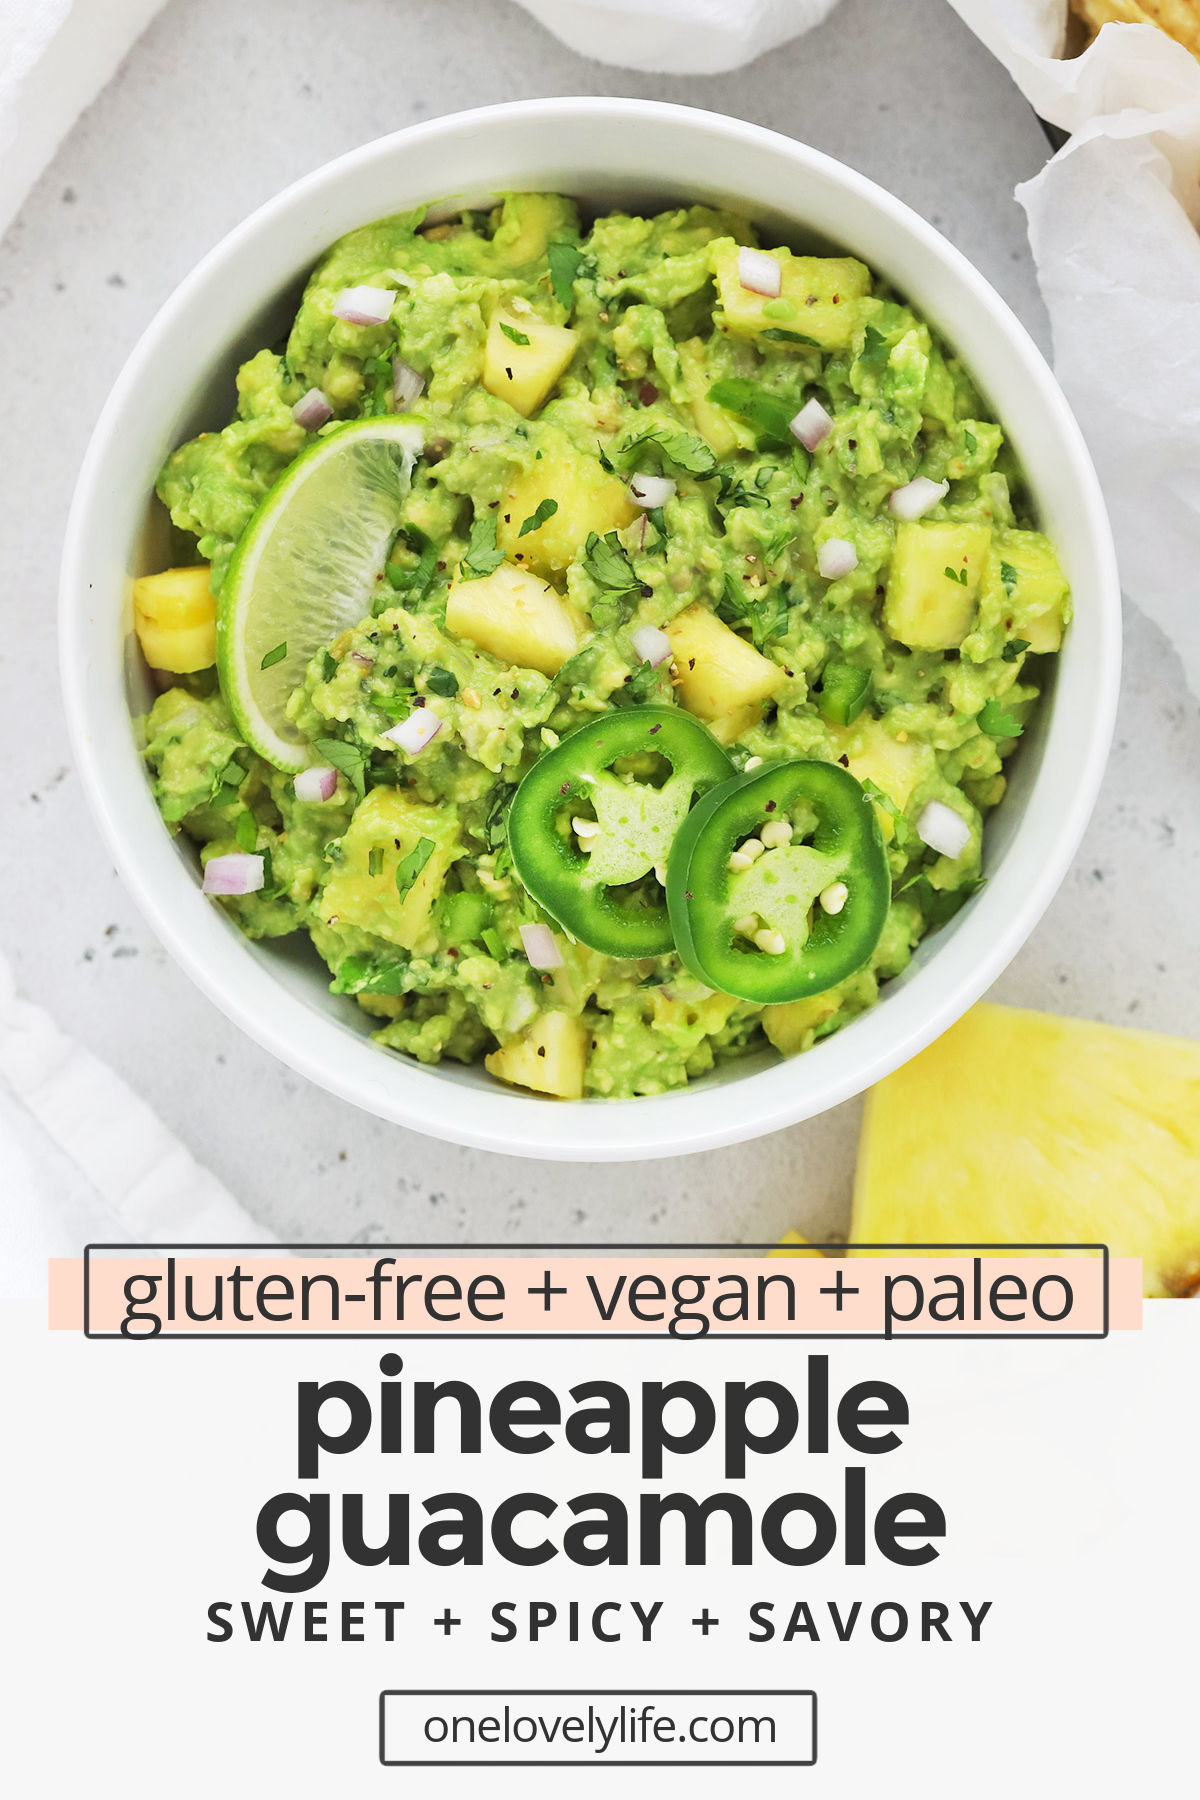 Pineapple Guacamole - Your favorite classic guacamole with a tropical twist! This sweet and spicy guacamole is delicious with all your Tex-Mex faves. Try all our ways to enjoy it below! (Gluten-Free, Paleo, Vegan) // Pineapple guacamole recipe // cinco de mayo // healthy appetizer #guacamole #healthyappetizer #appetizer #glutenfree #pineapple #paleo #vegan #whole30